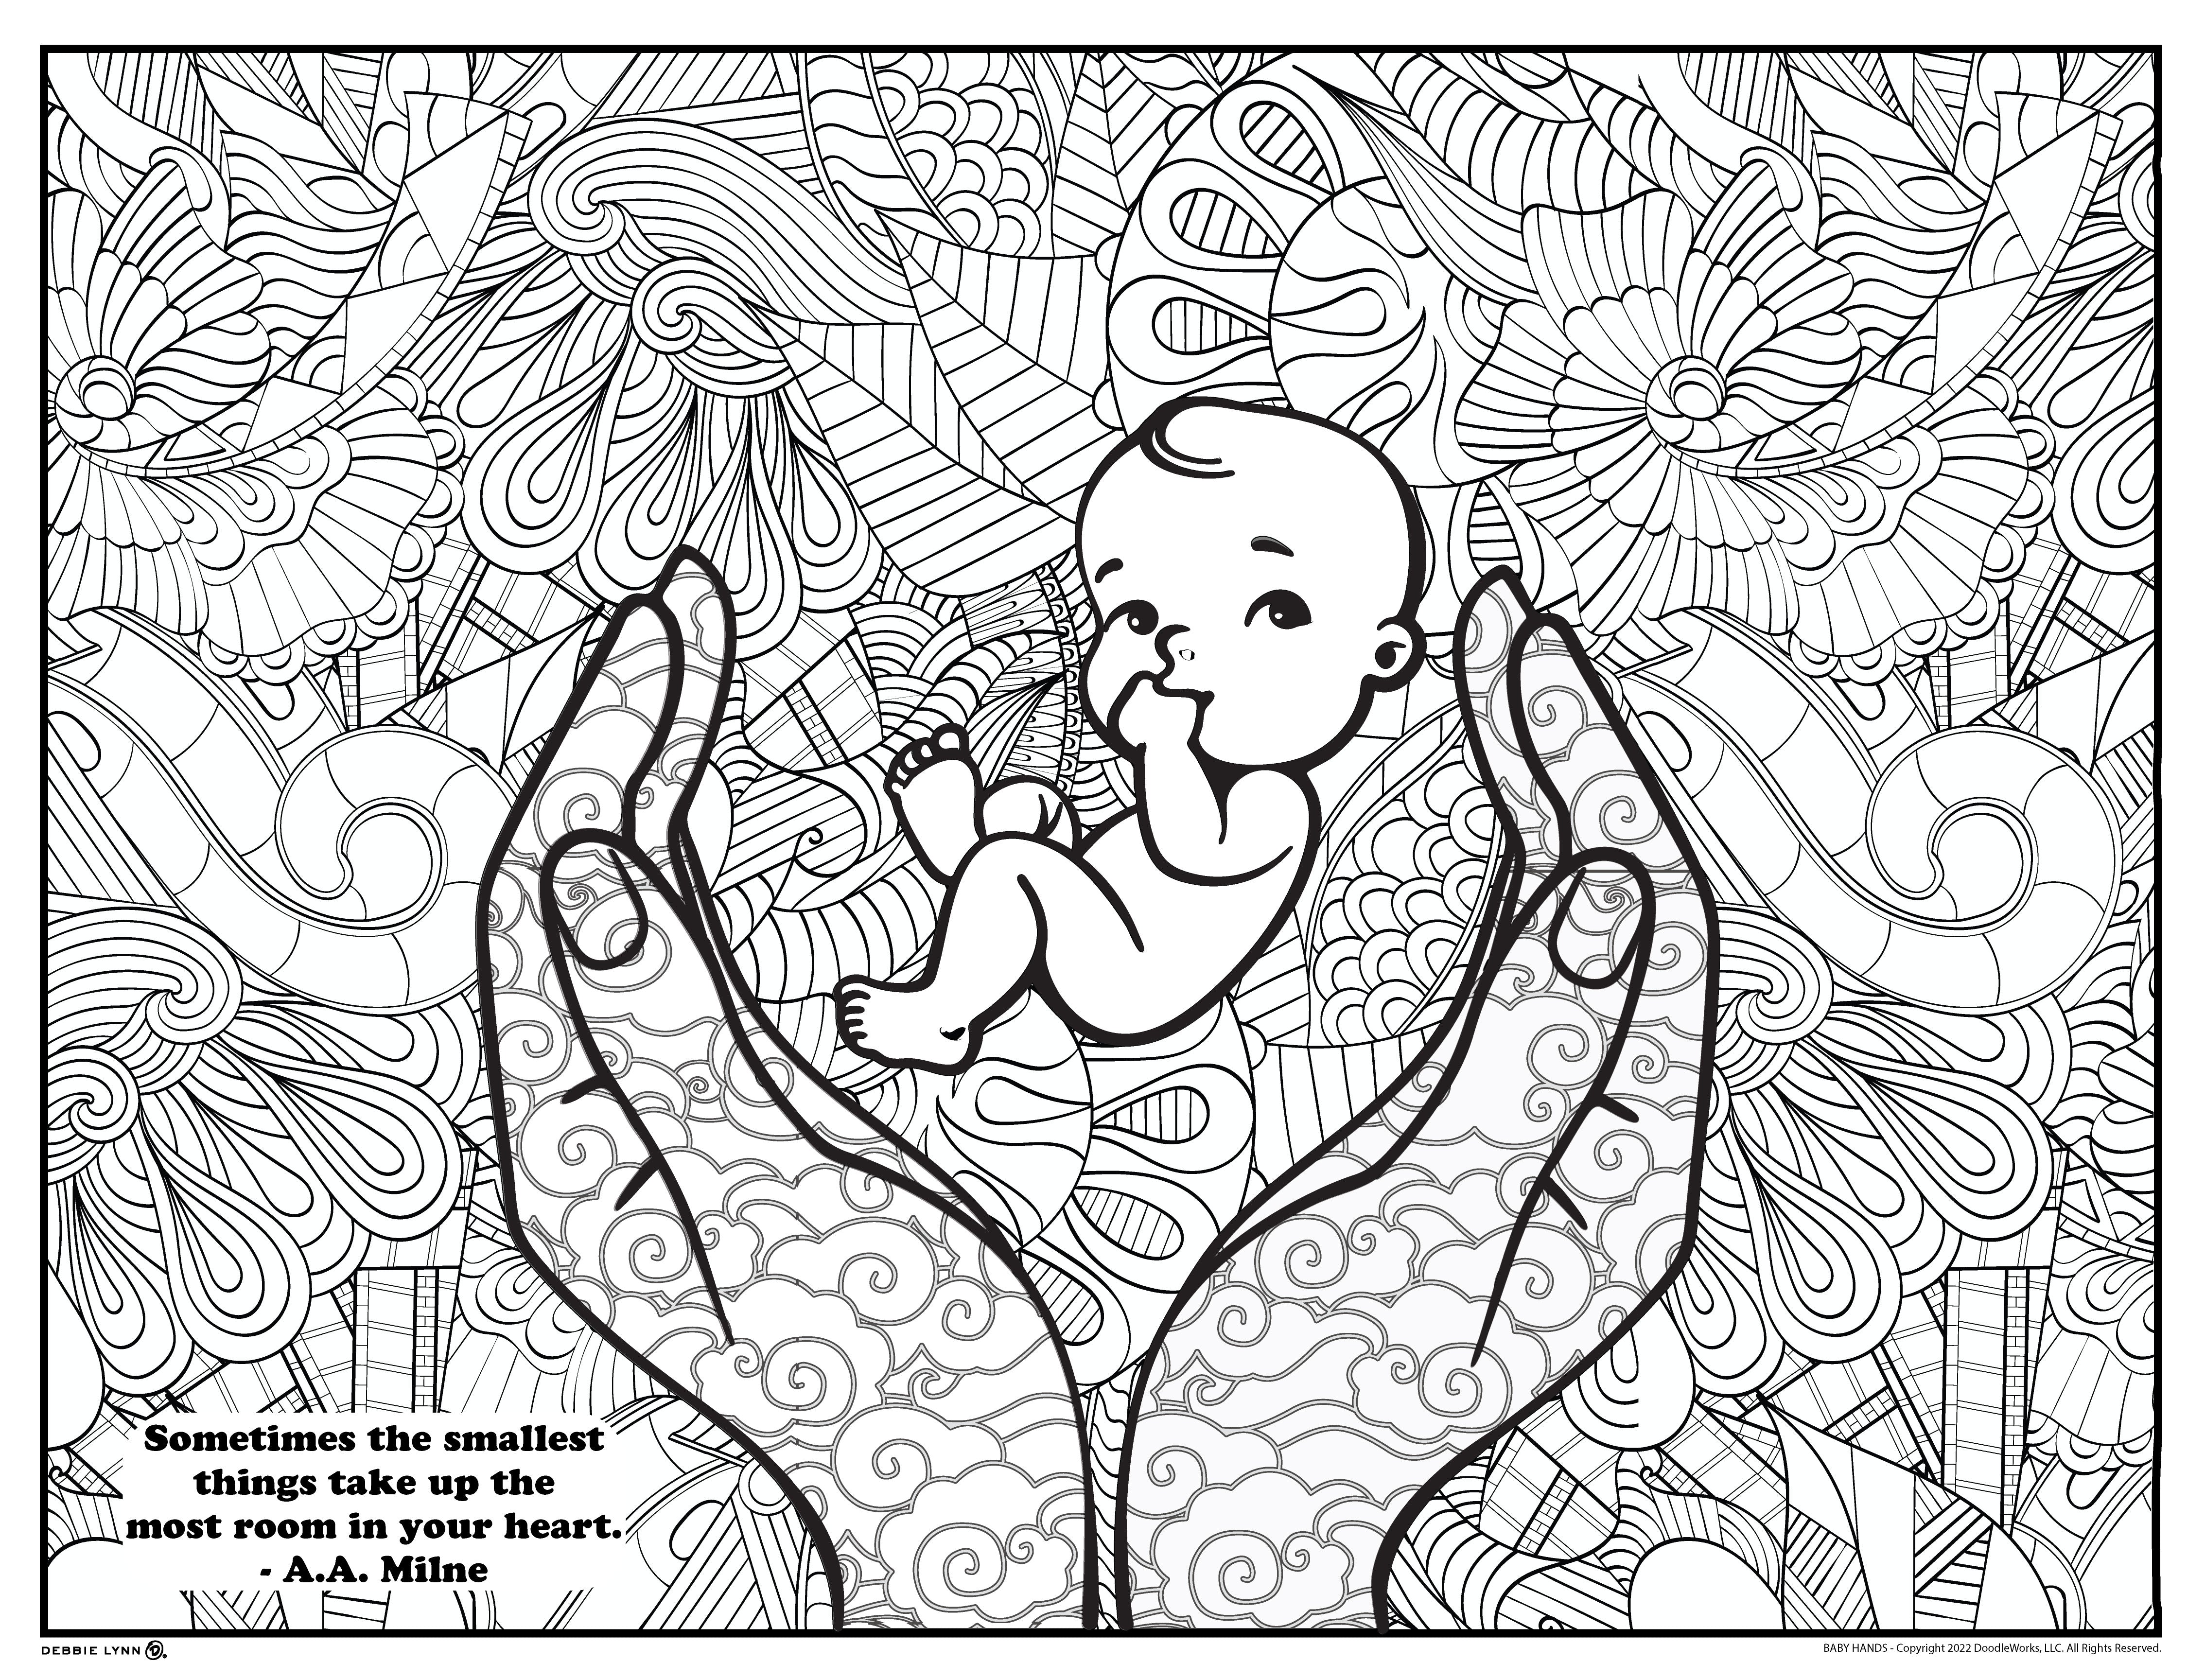 Helping Hands Community Personalized Giant Coloring Poster 48x63